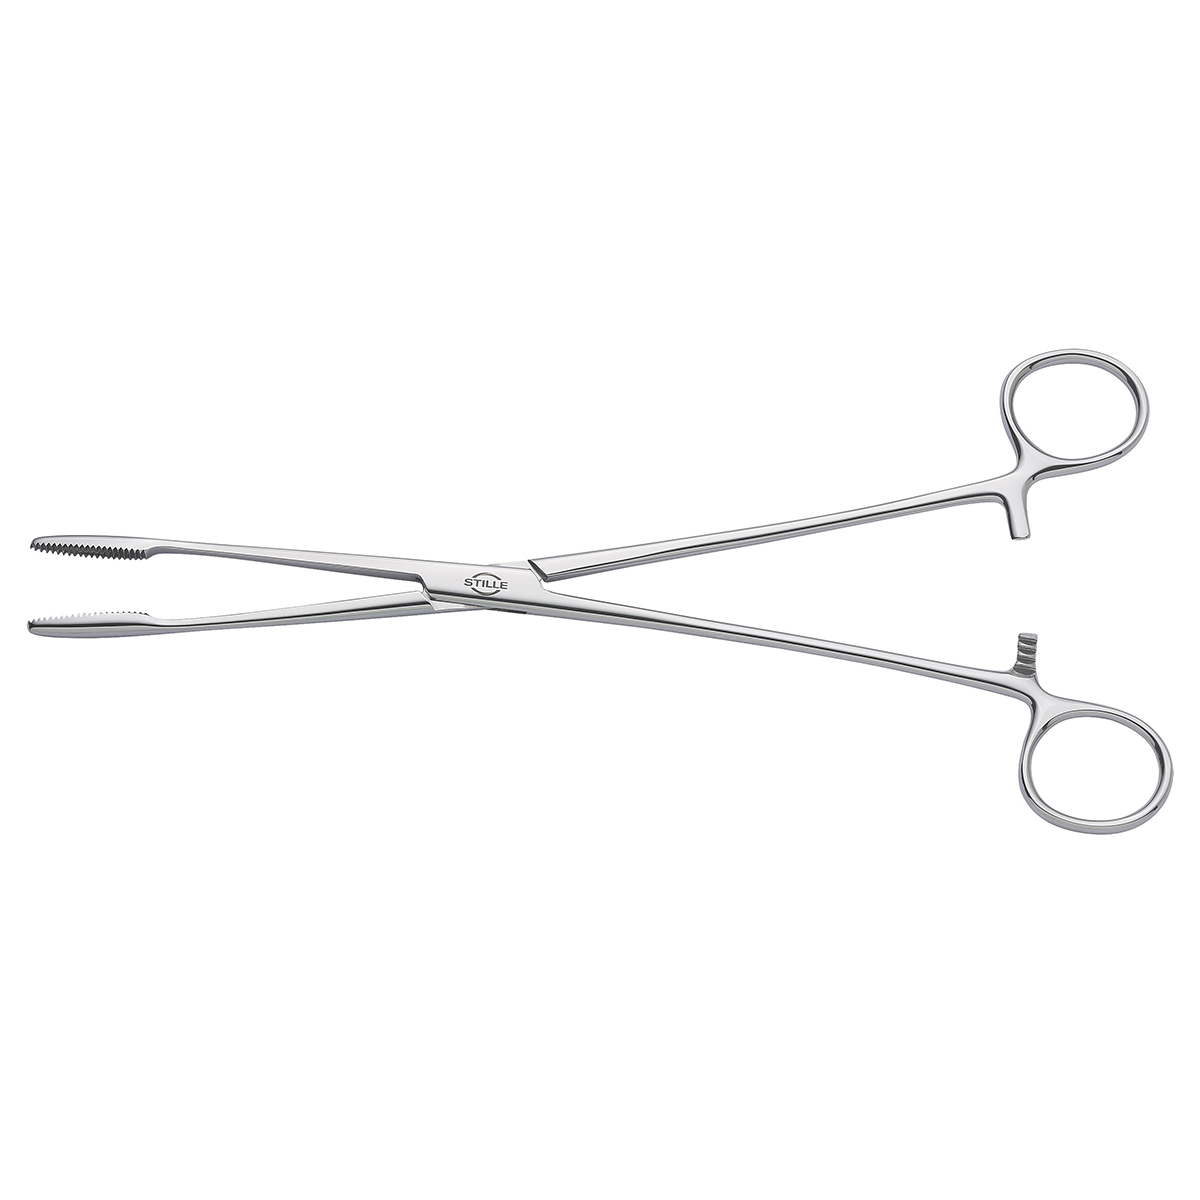 Toothed Forceps Outlet Styles, Save 56% | jlcatj.gob.mx